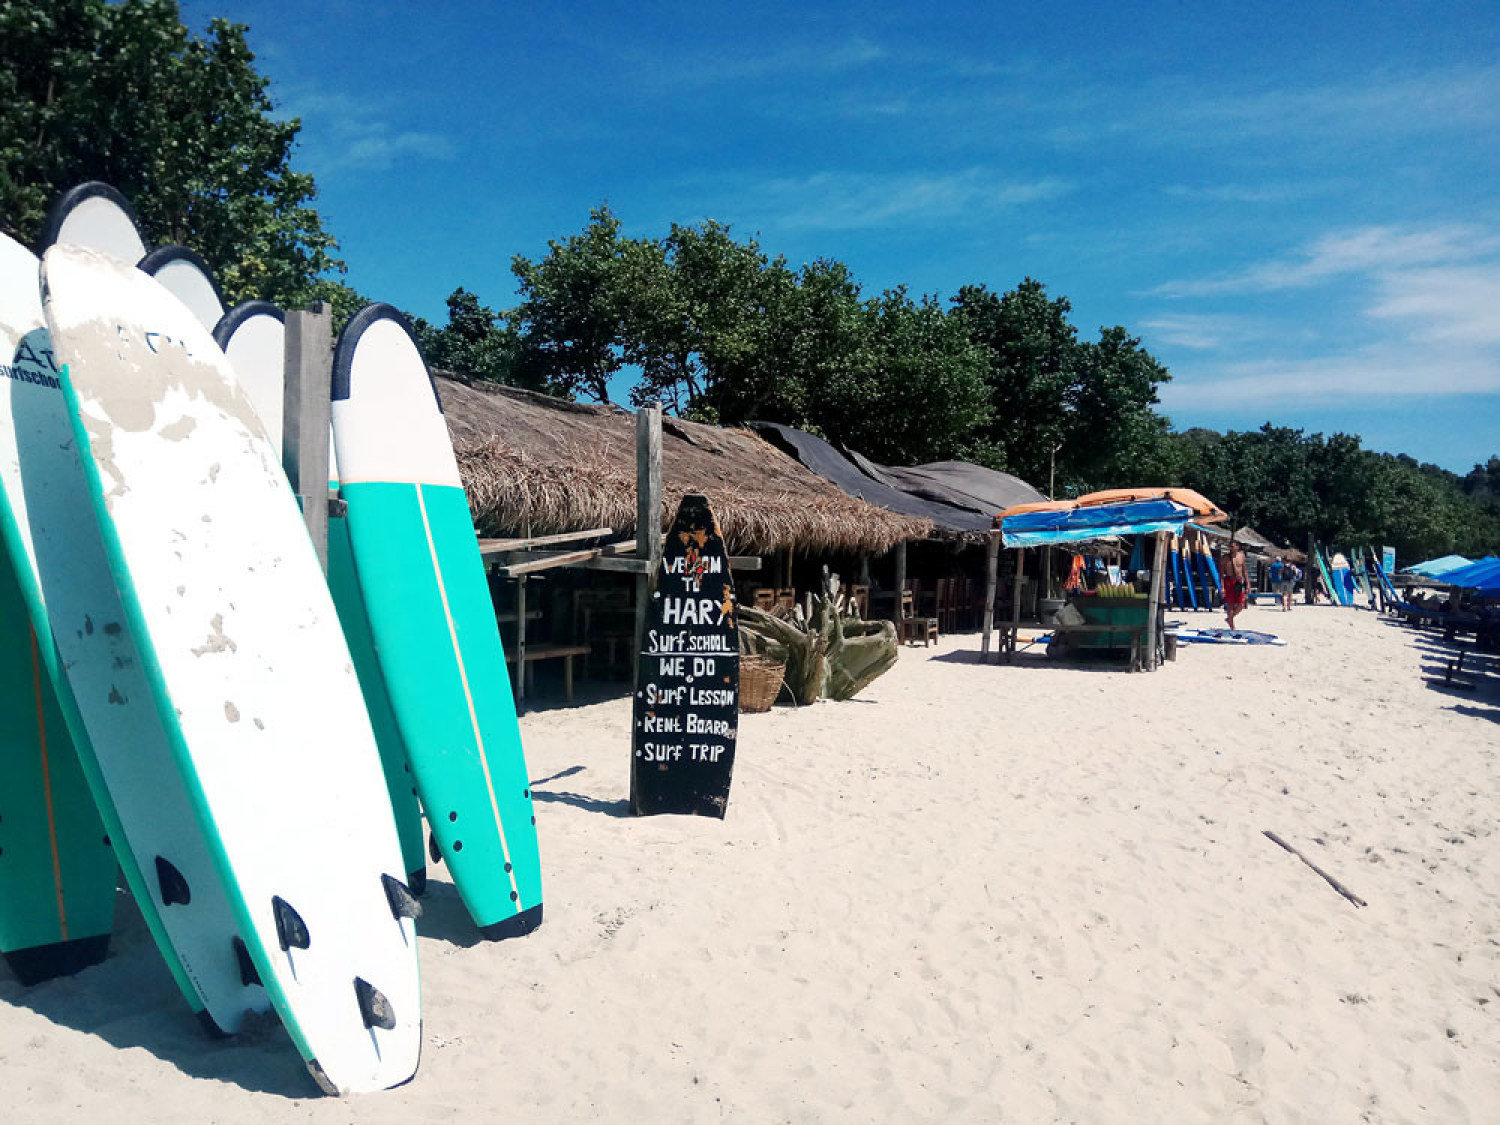 Time to learn: Surfboard rentals and schools are scattered along Selong Belanak Beach, which is just a 30-minute drive from Lombok’s tourist hub of Kuta. -/Vyara Wurjanta